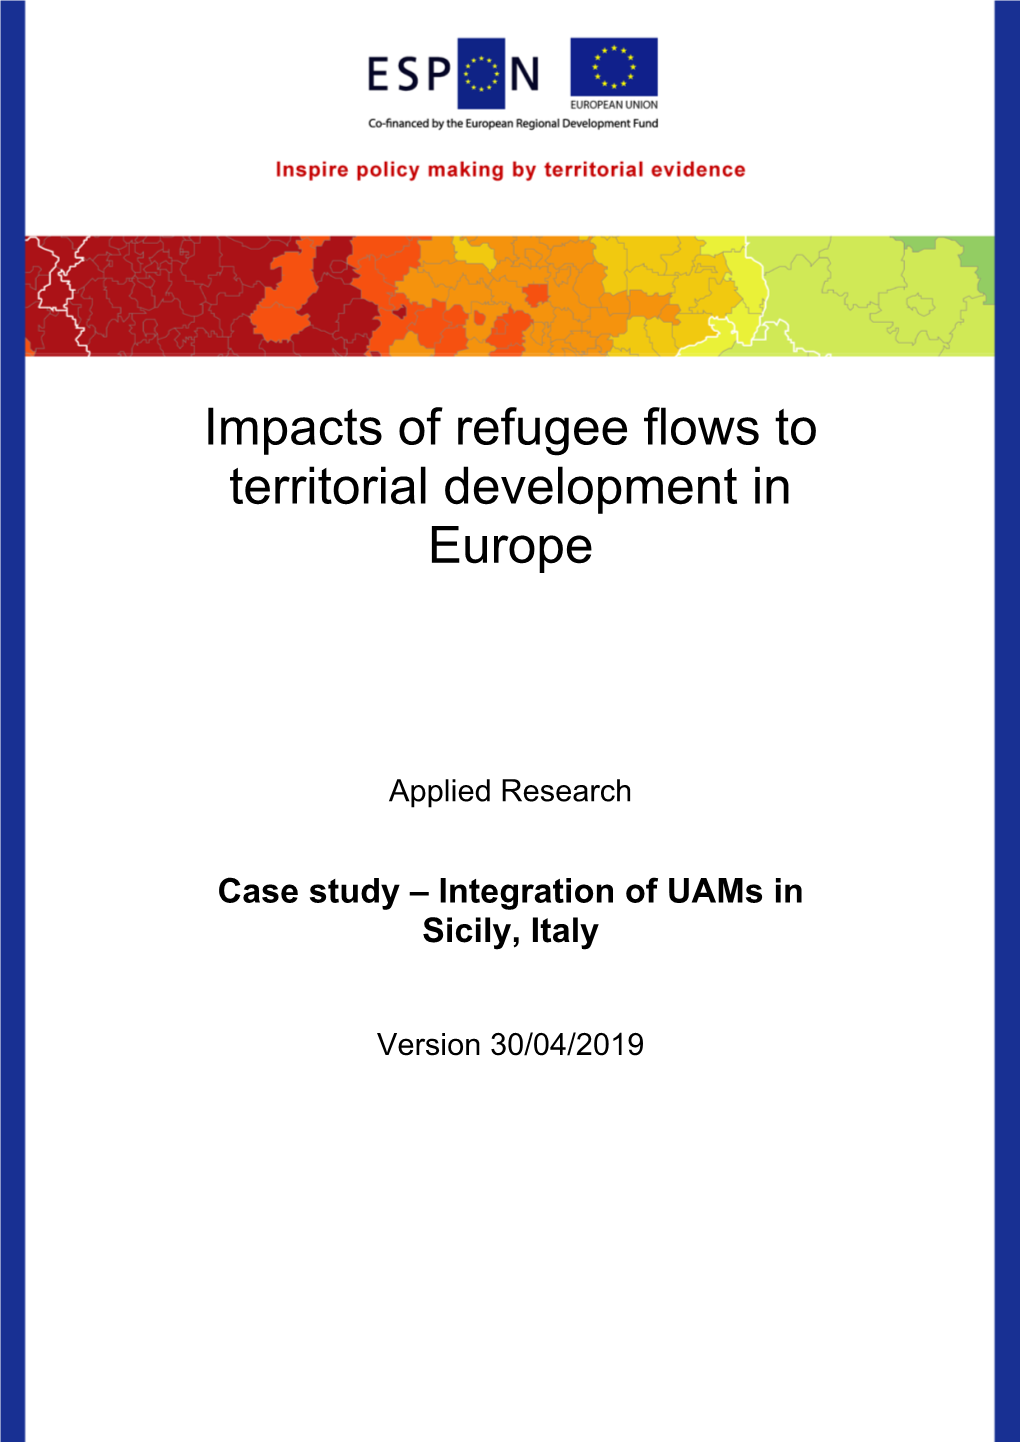 Impacts of Refugee Flows to Territorial Development in Europe